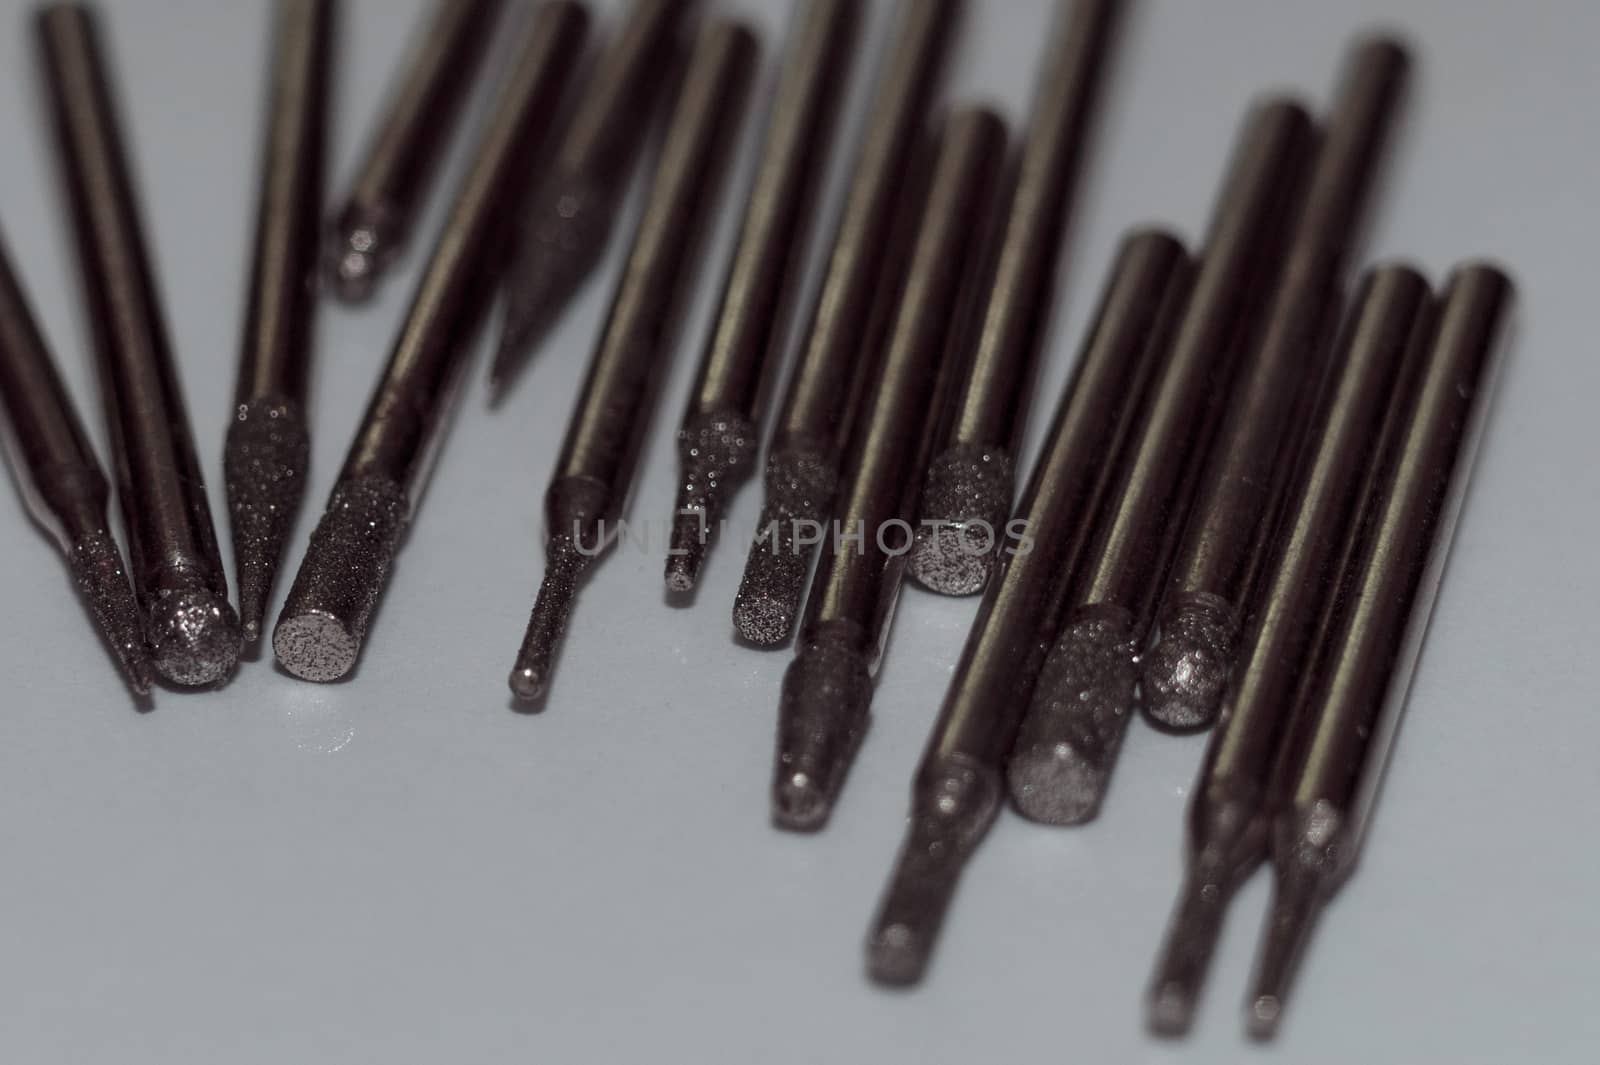 Diamond drill bits on white background. Close-up view. Tools jeweler and dentist. by alexsdriver